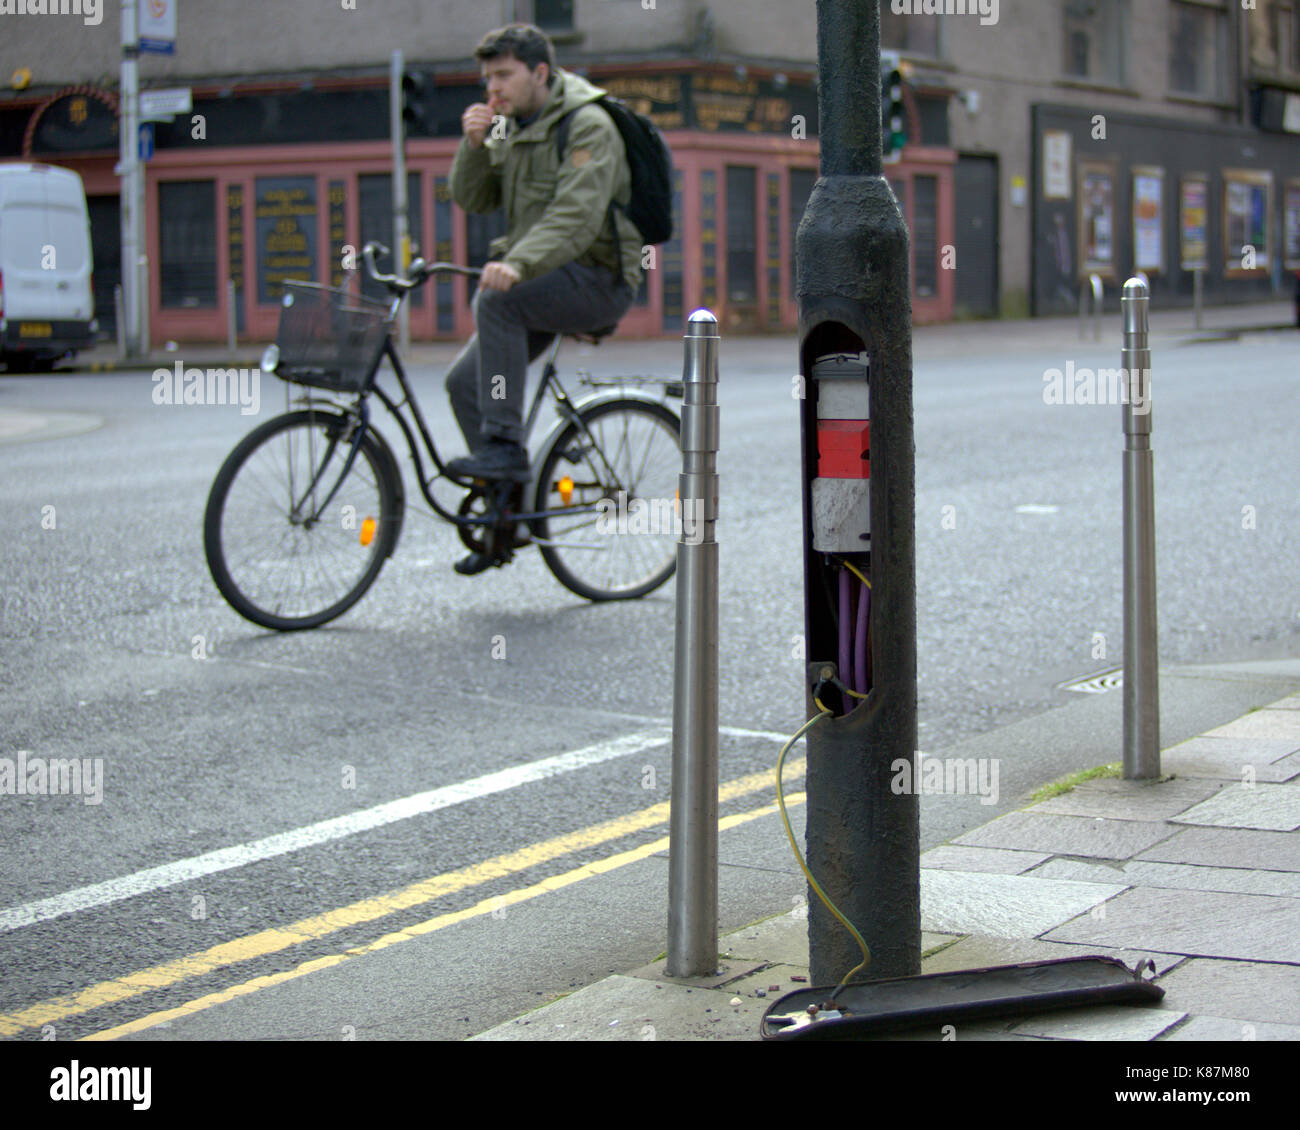 cyclist  on in Glasgow bike cycles past vandalized opened lamppost with cables showing  a comment on Lamp post charging being considered in Scotland Stock Photo